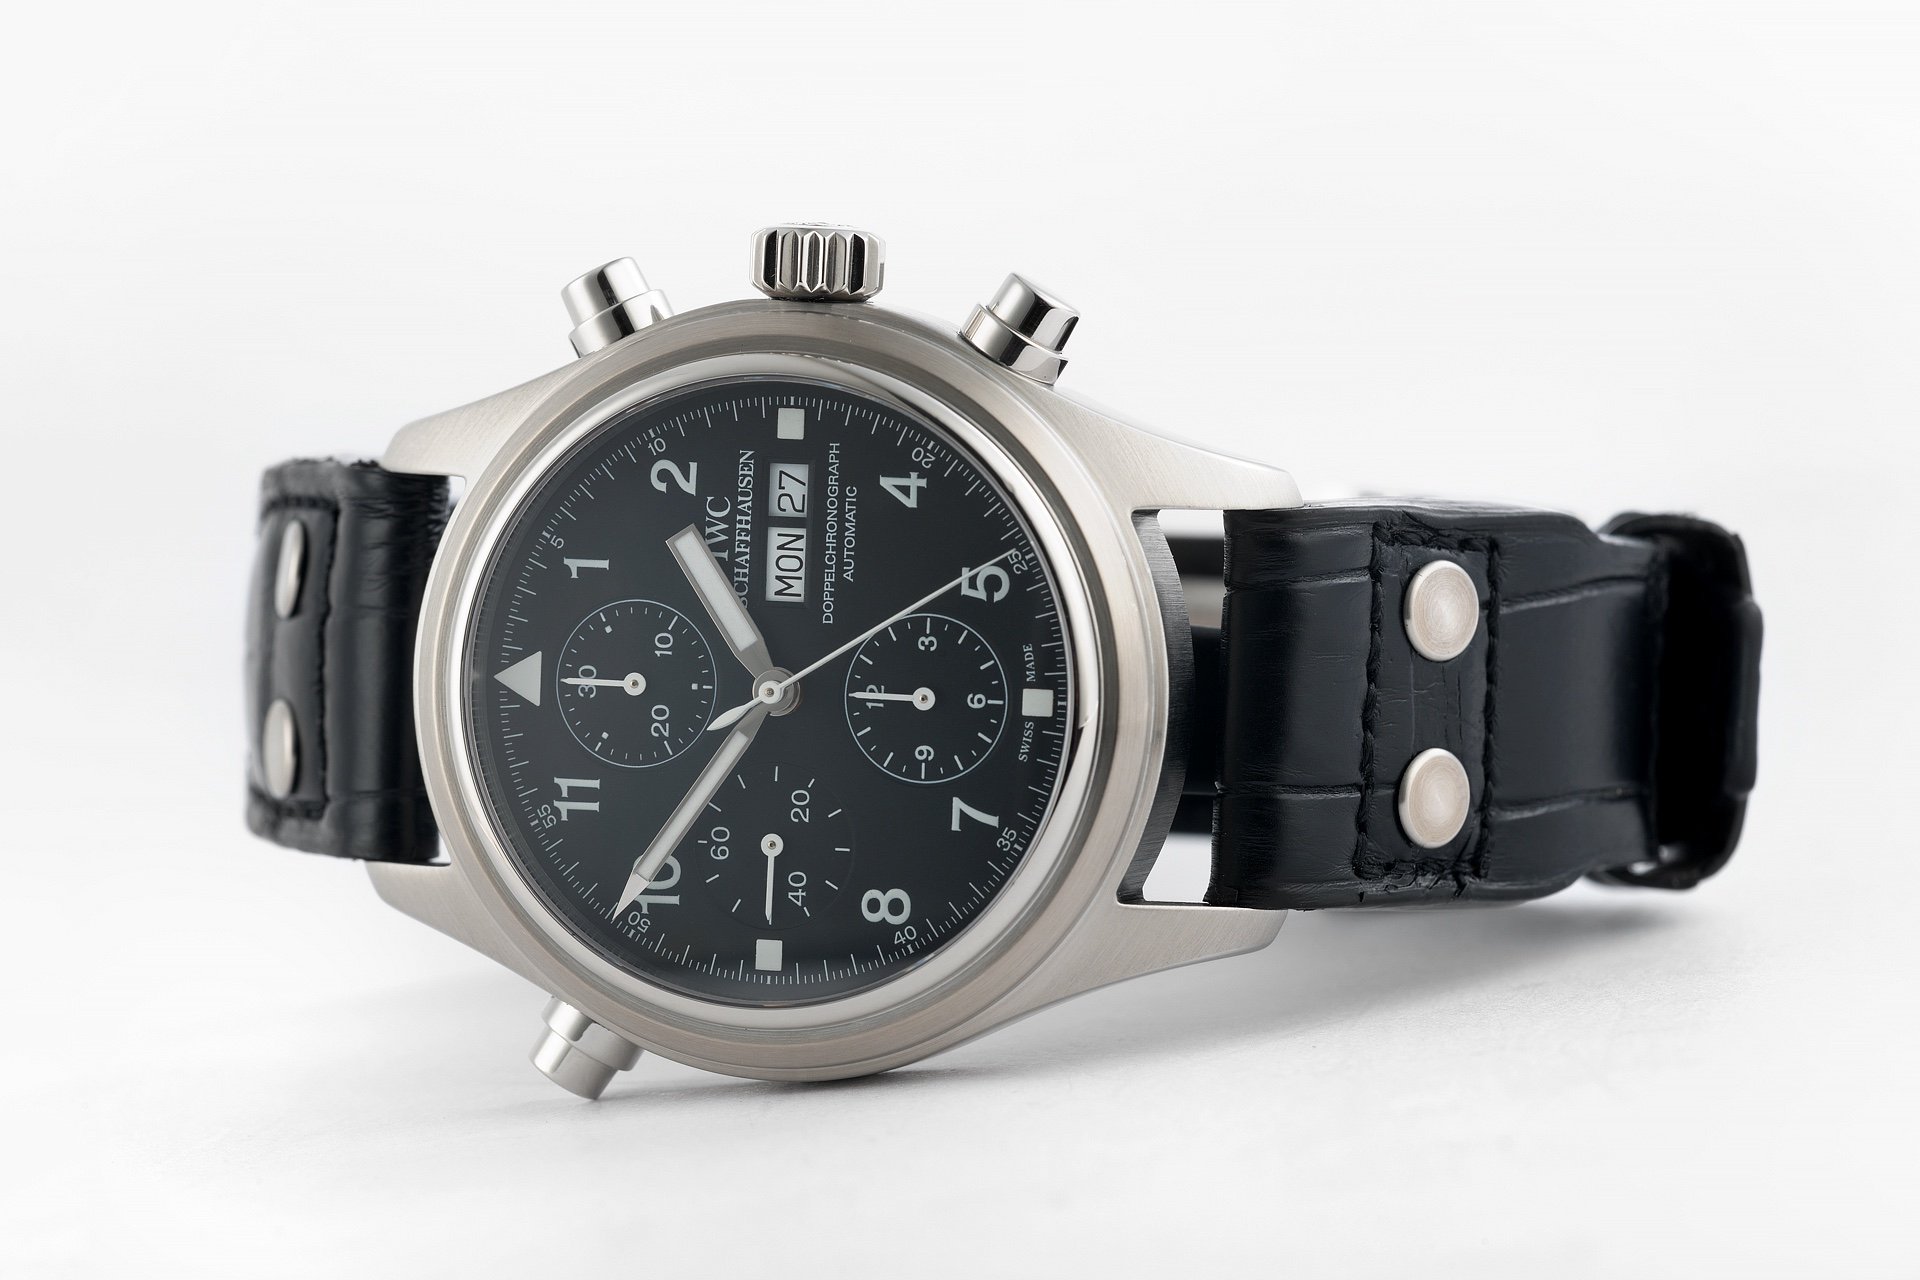 Pre-owned sleeper watches IWC Doppelchronograph Ref. 3713